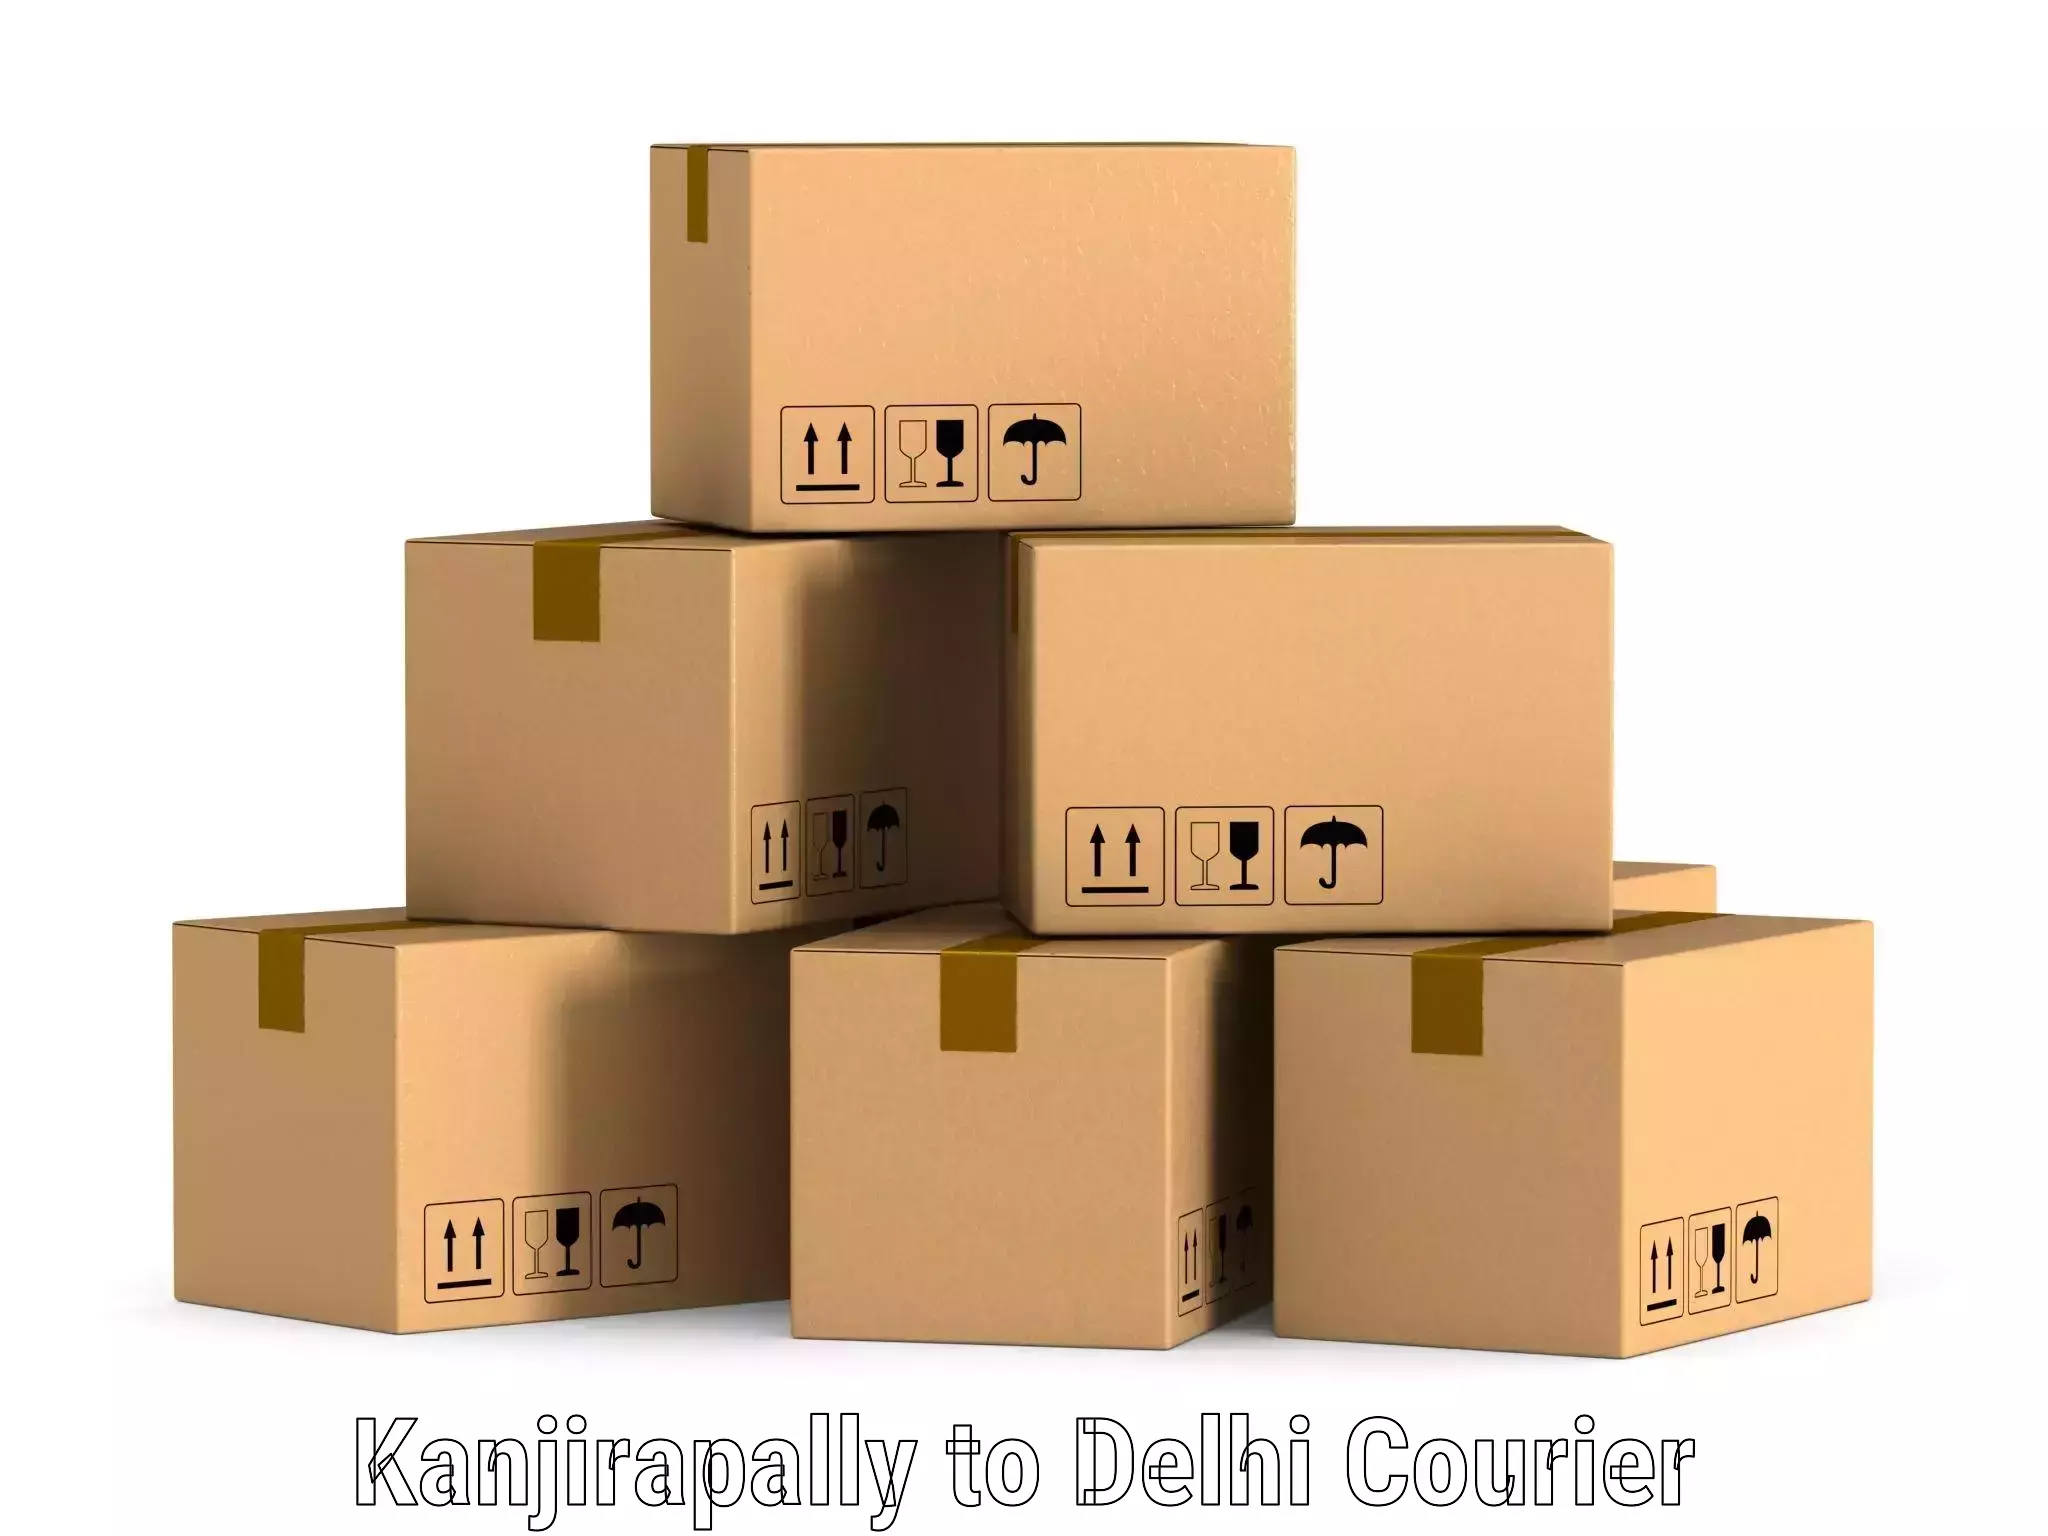 Package delivery network Kanjirapally to Delhi